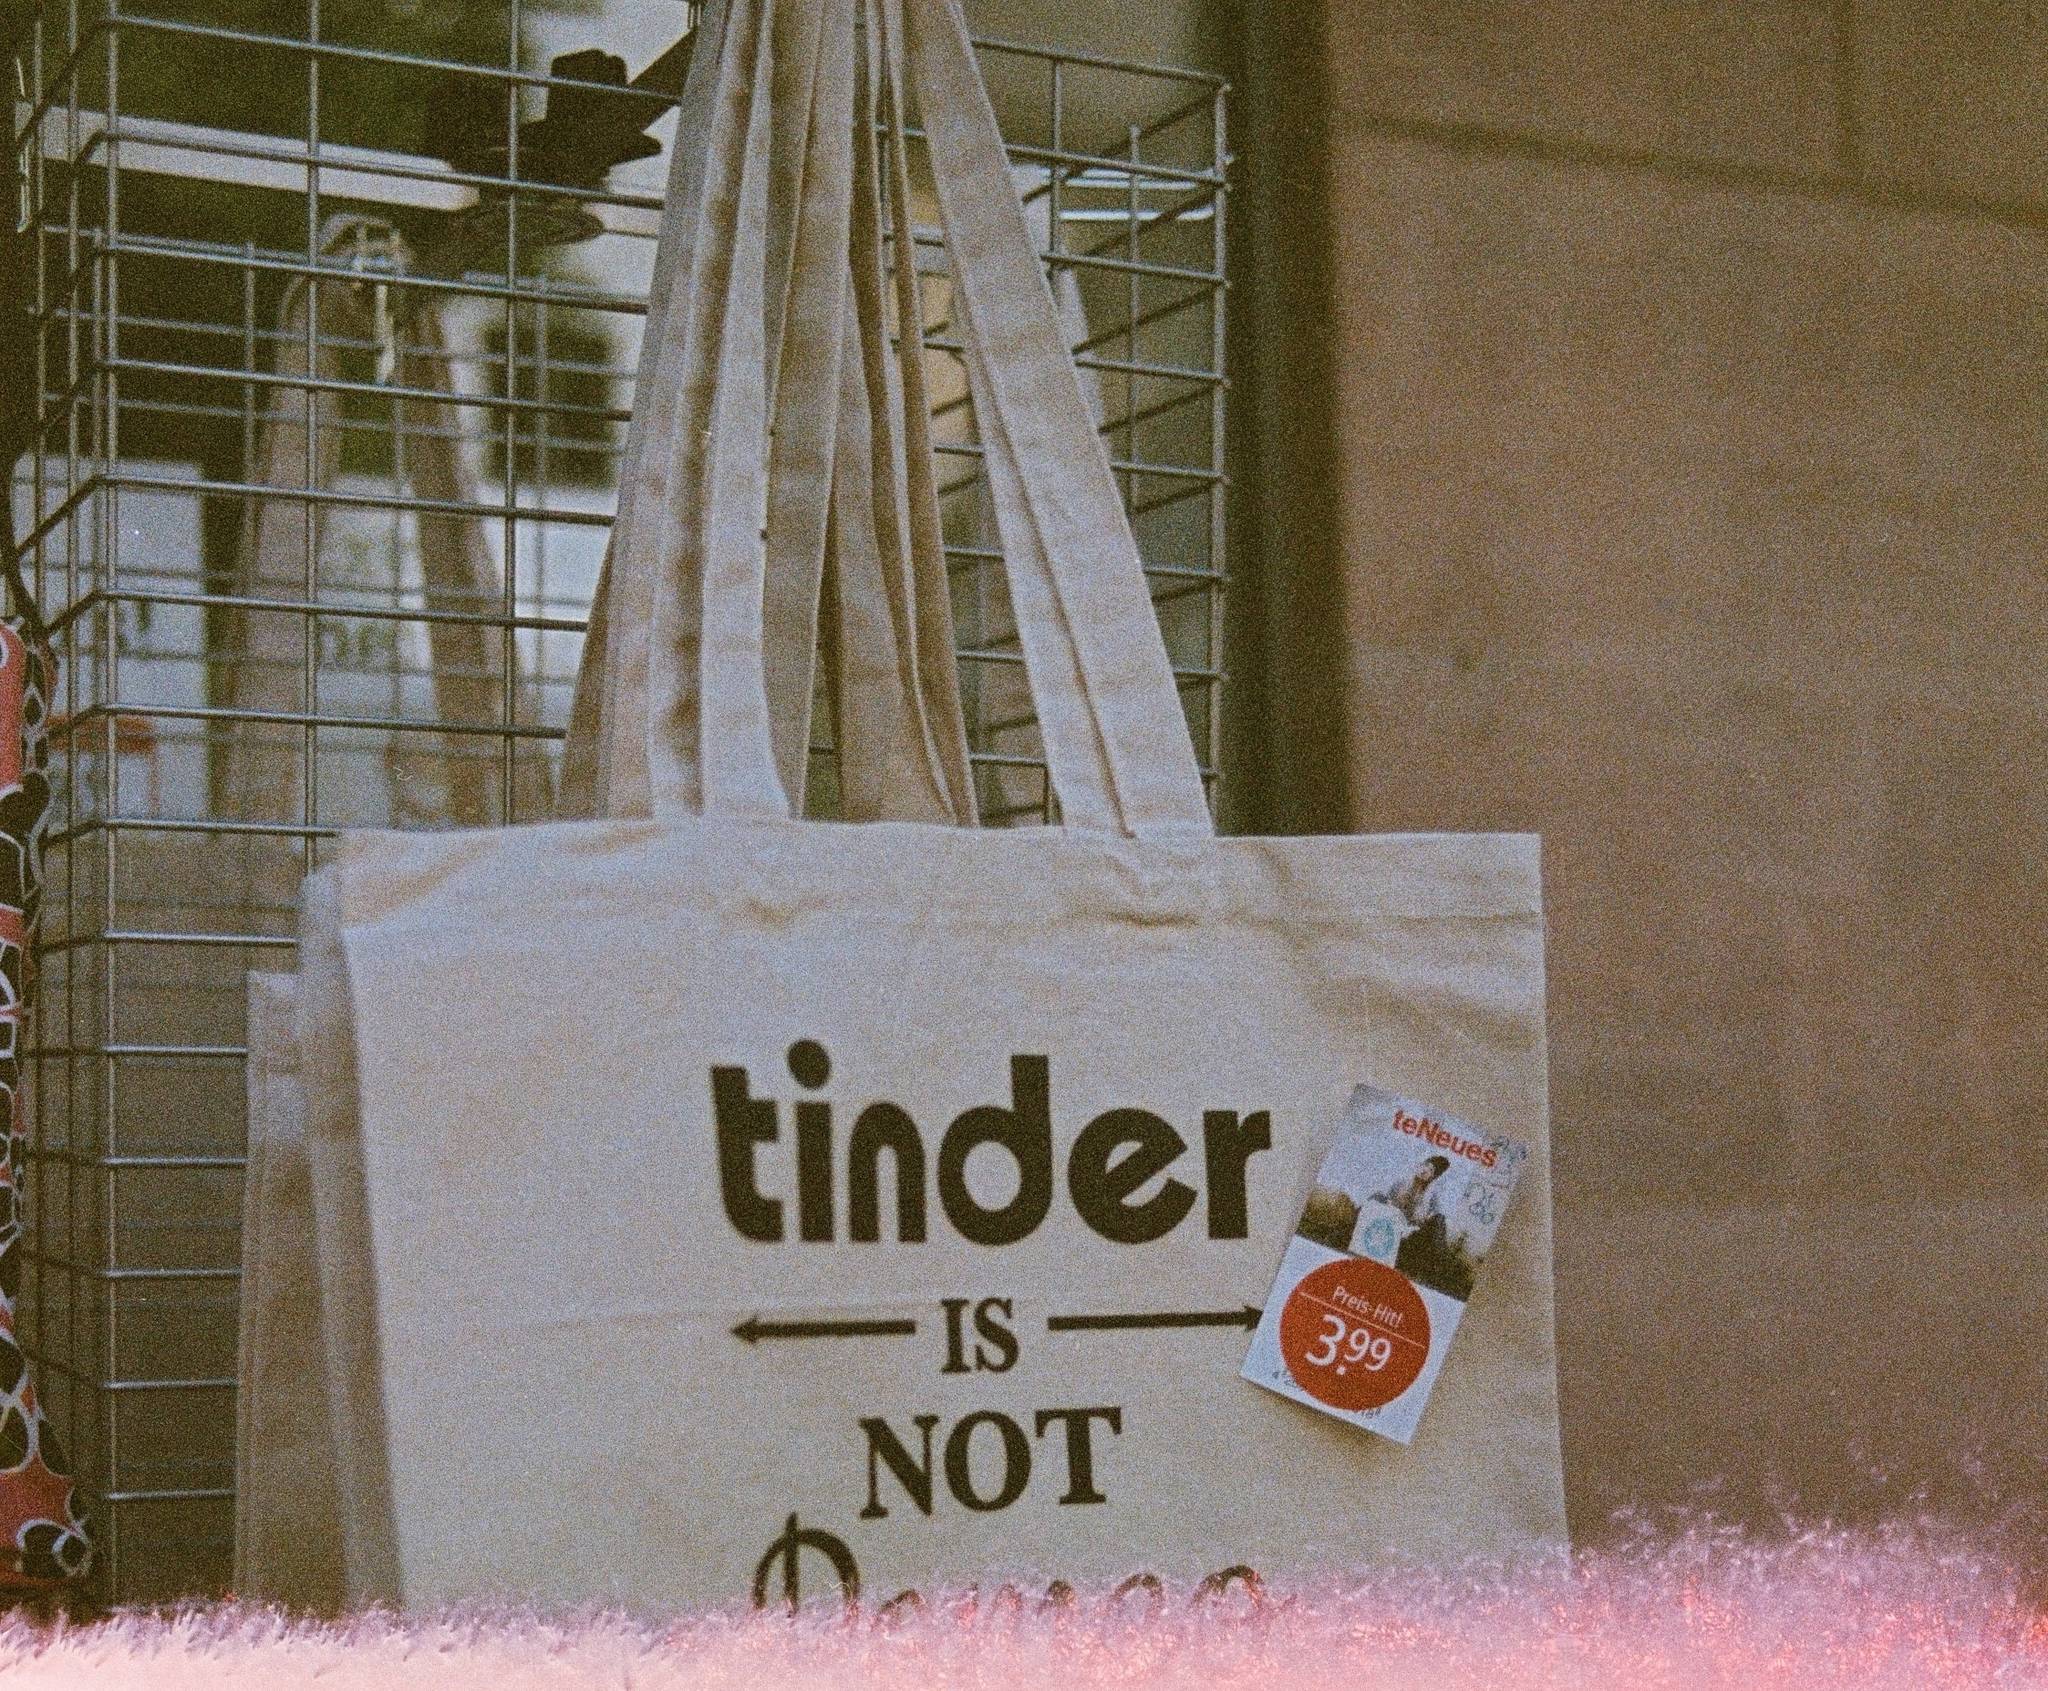 People using Tinder are looking for more than just dates